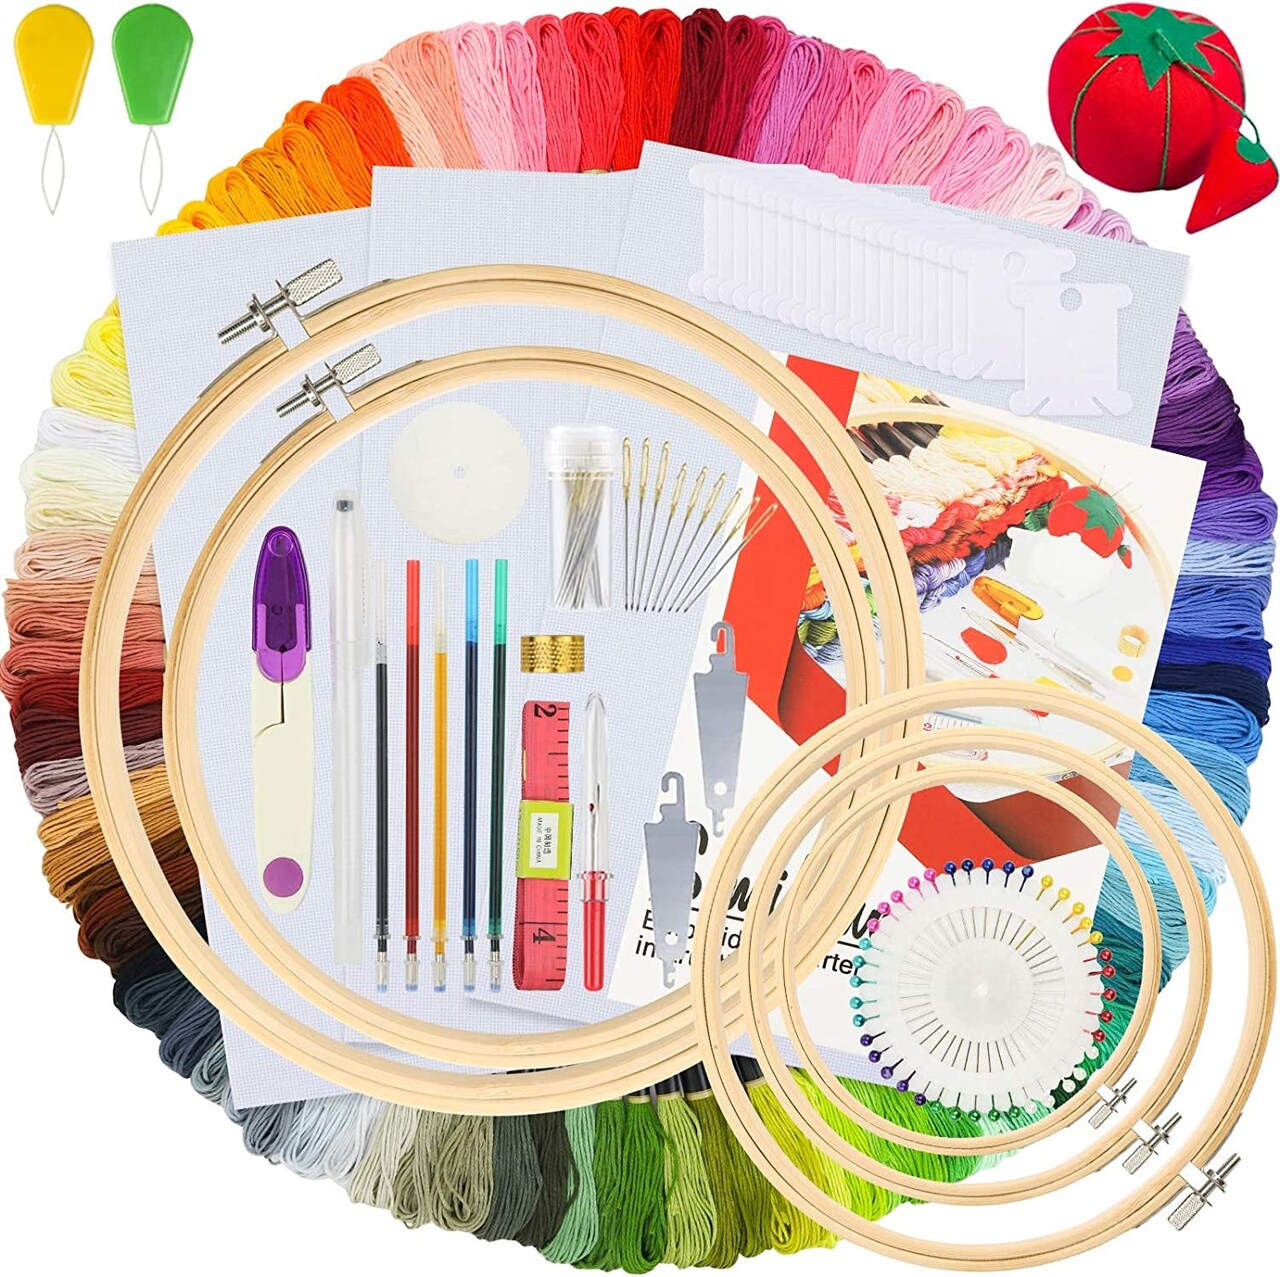 Embroidery Kit 215 Pcs,100 Colors Threads,5 Pcs Embroidery Hoops,3